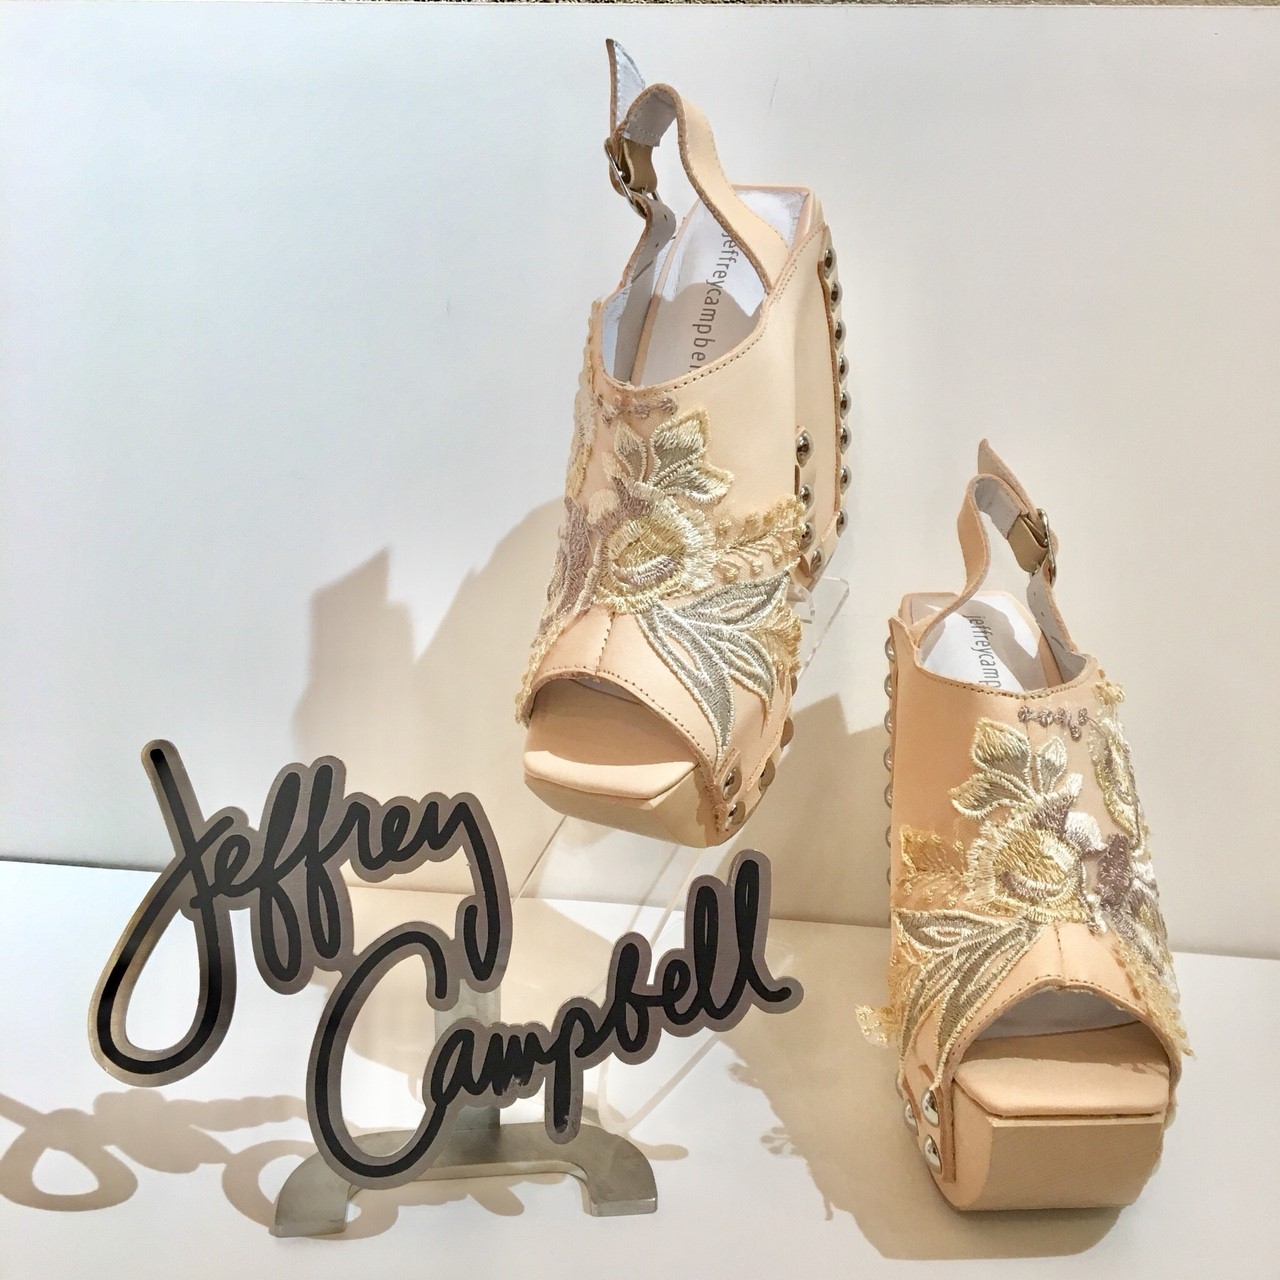 jeffrey campbell（ジェフリーキャンベル）が新入荷♪